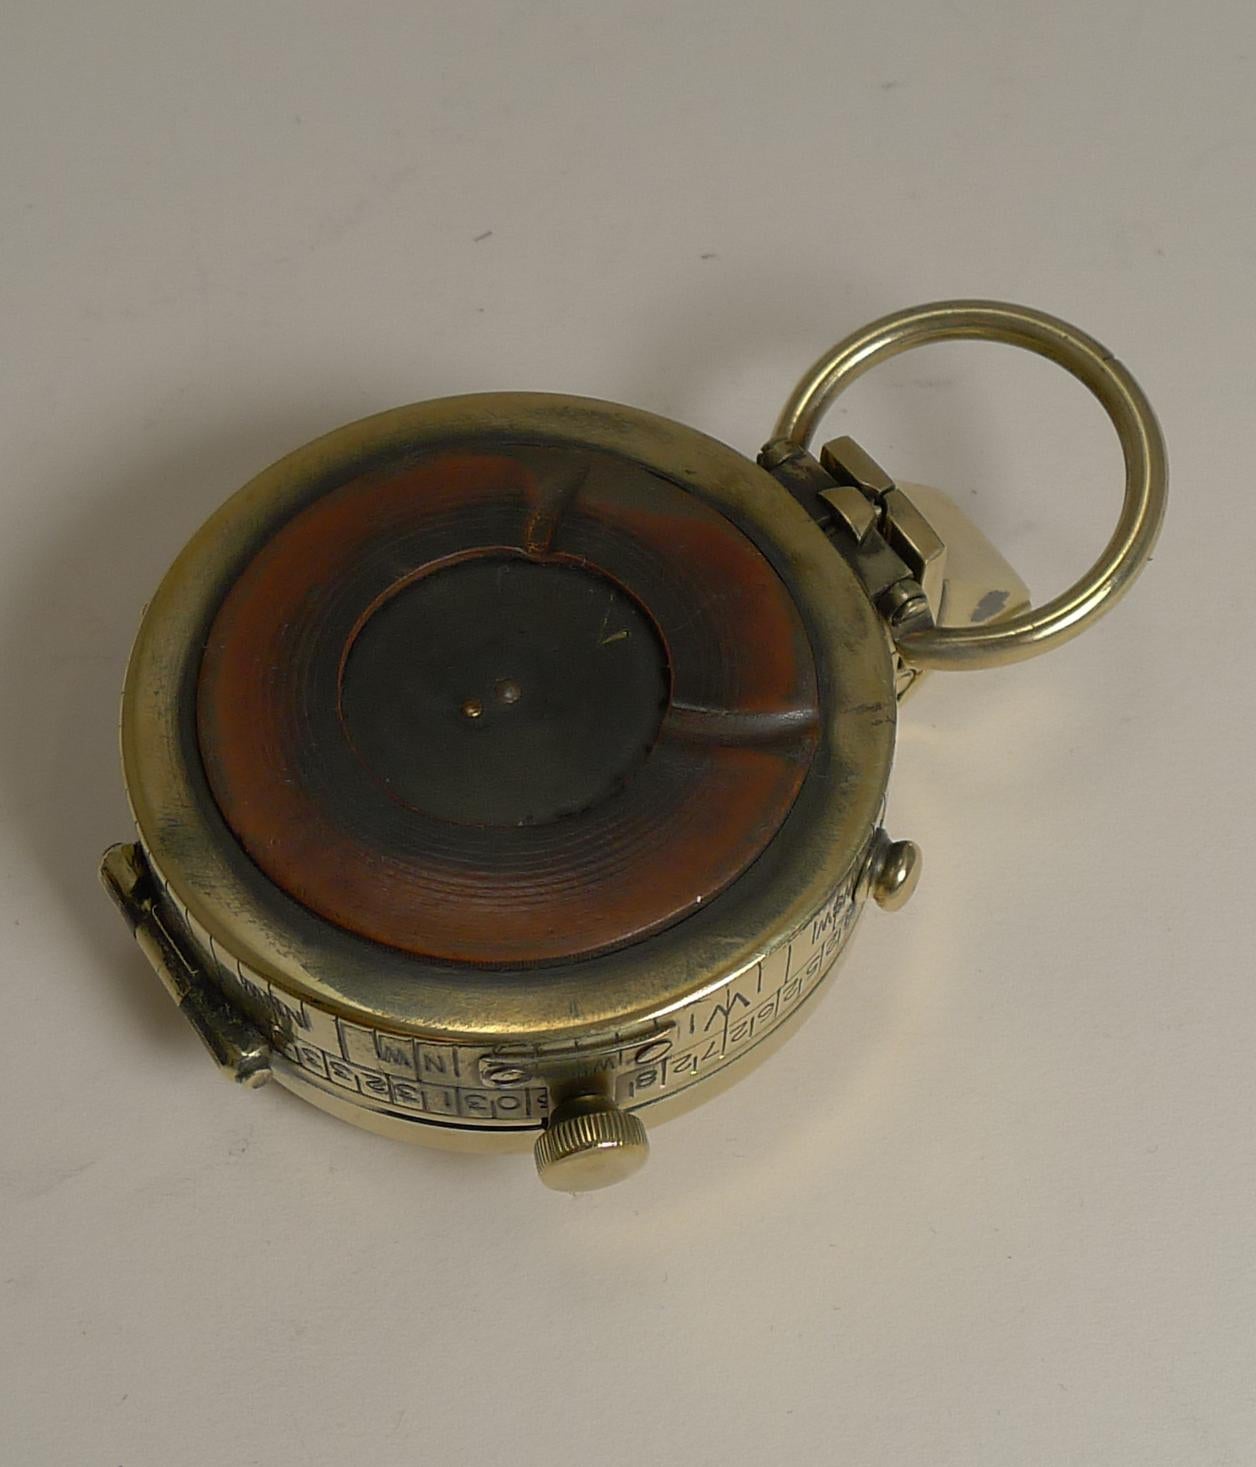 WWI 1918 British Army Officer's Compass by J H Steward, London 3